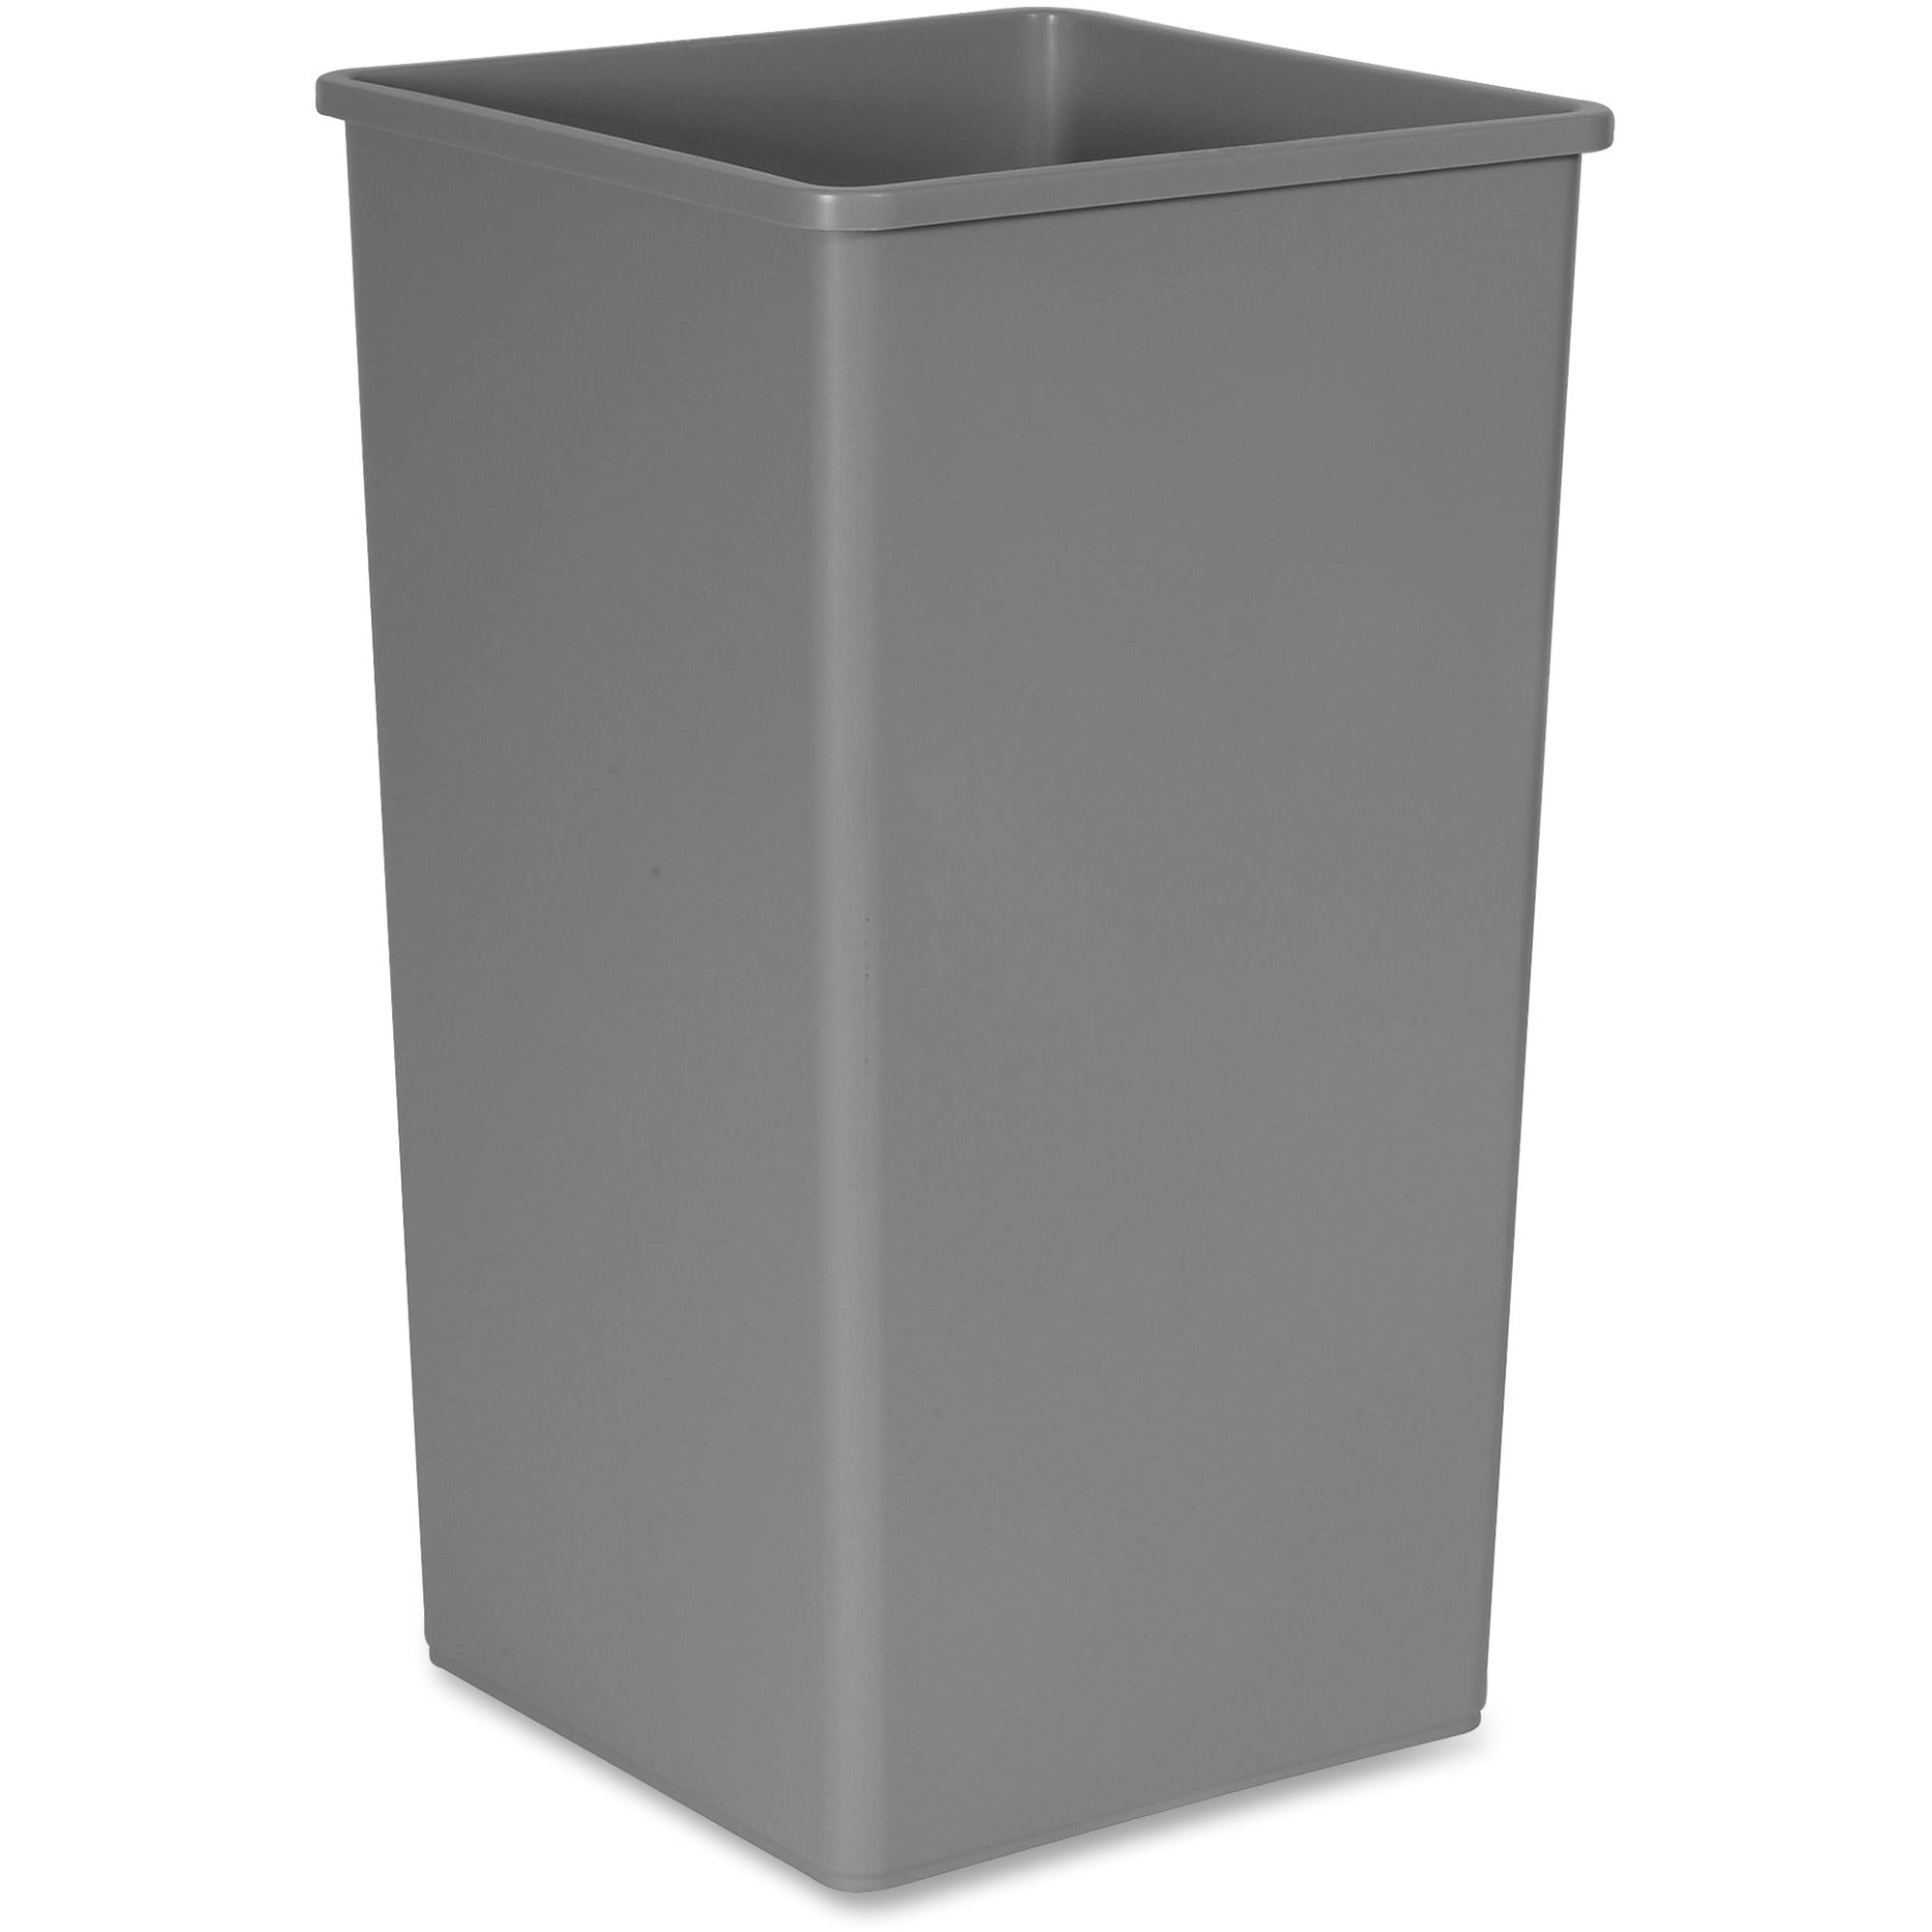 rubbermaid-commercial-untouchable-square-container-50-gal-capacity-square-crack-resistant-durable-compact-rugged-343-height-x-195-width-x-195-depth-plastic-gray-4-carton_rcp3959gract - 1